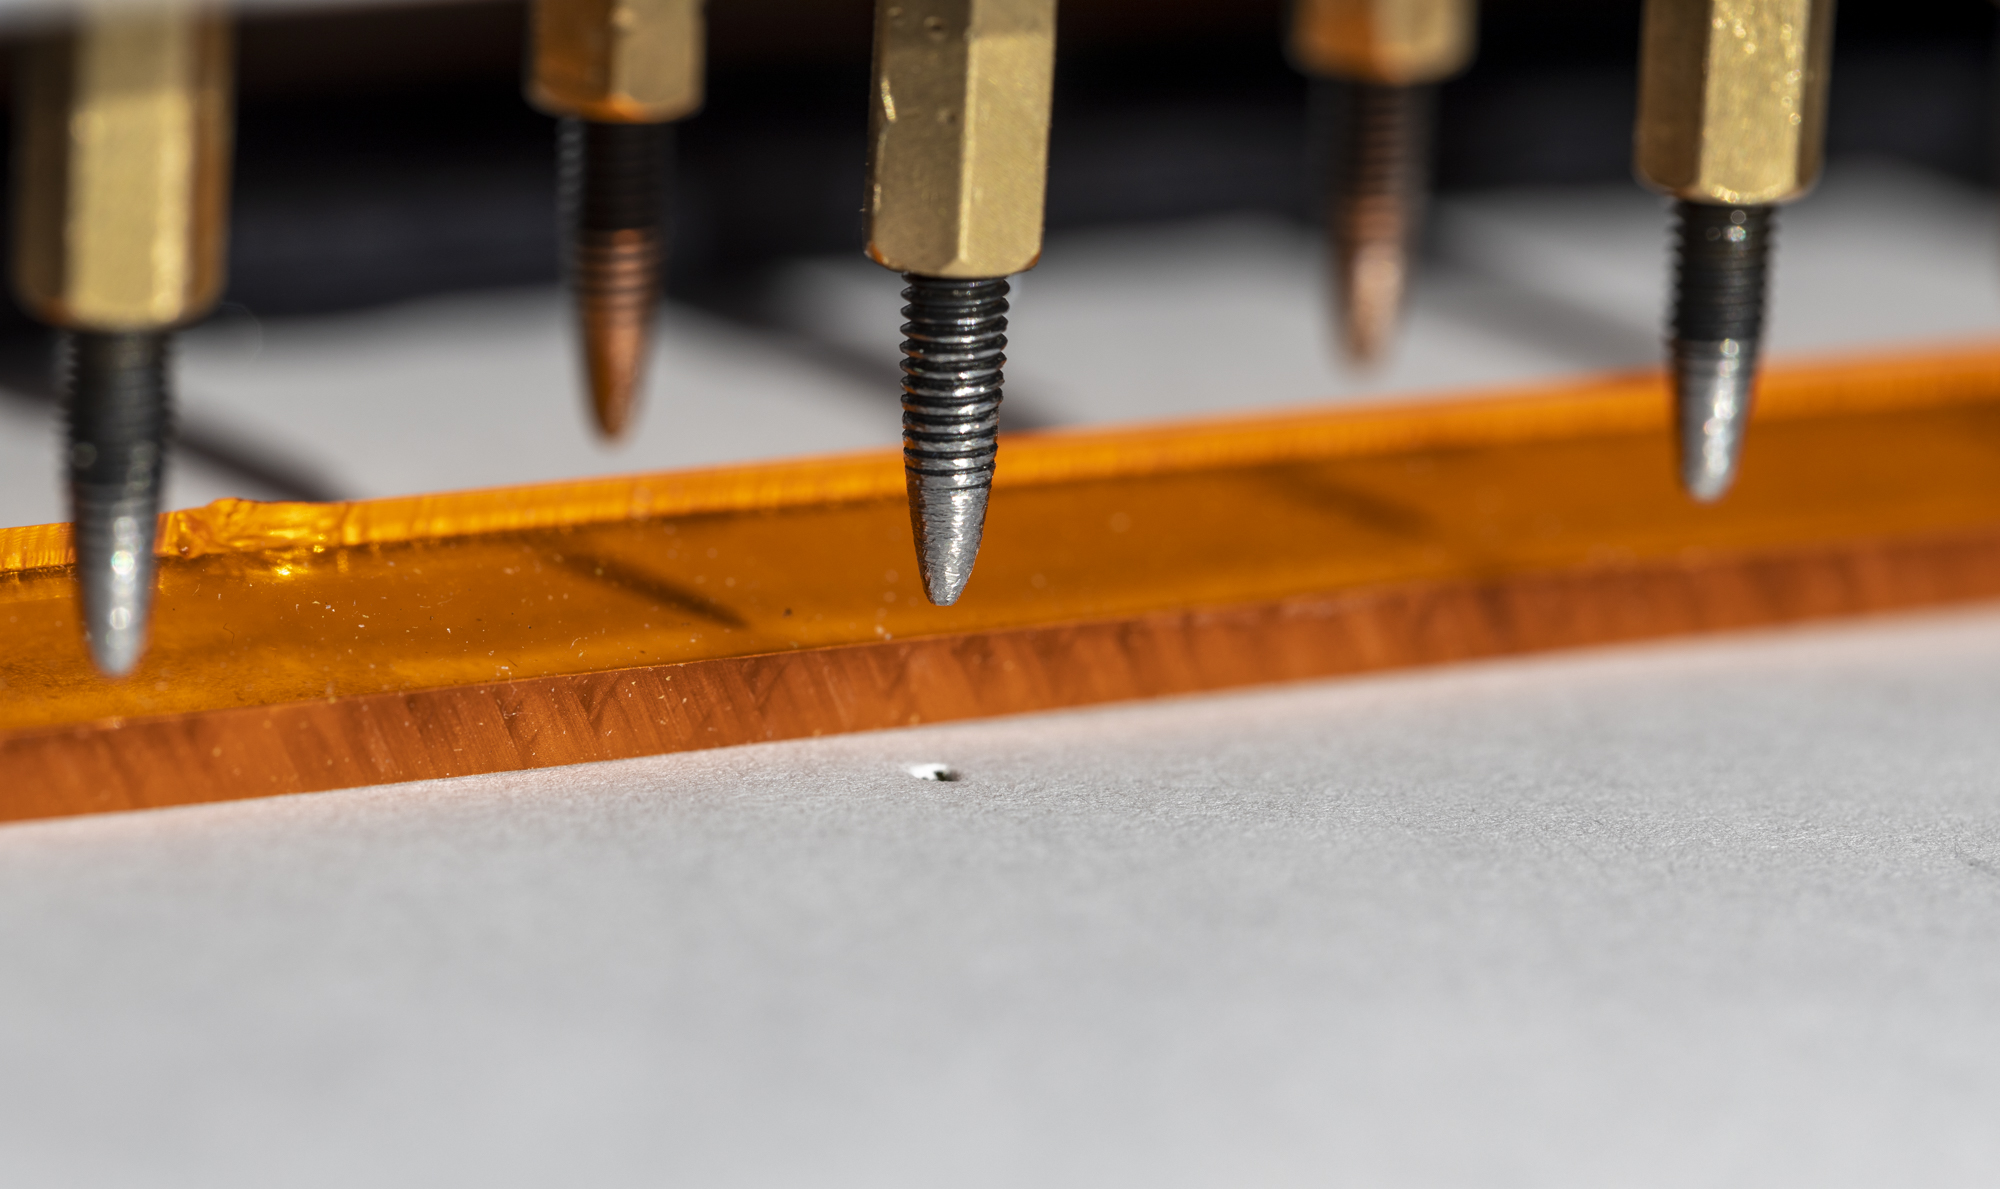 The Portabraille Printer solenoid tips punching a piece of paper